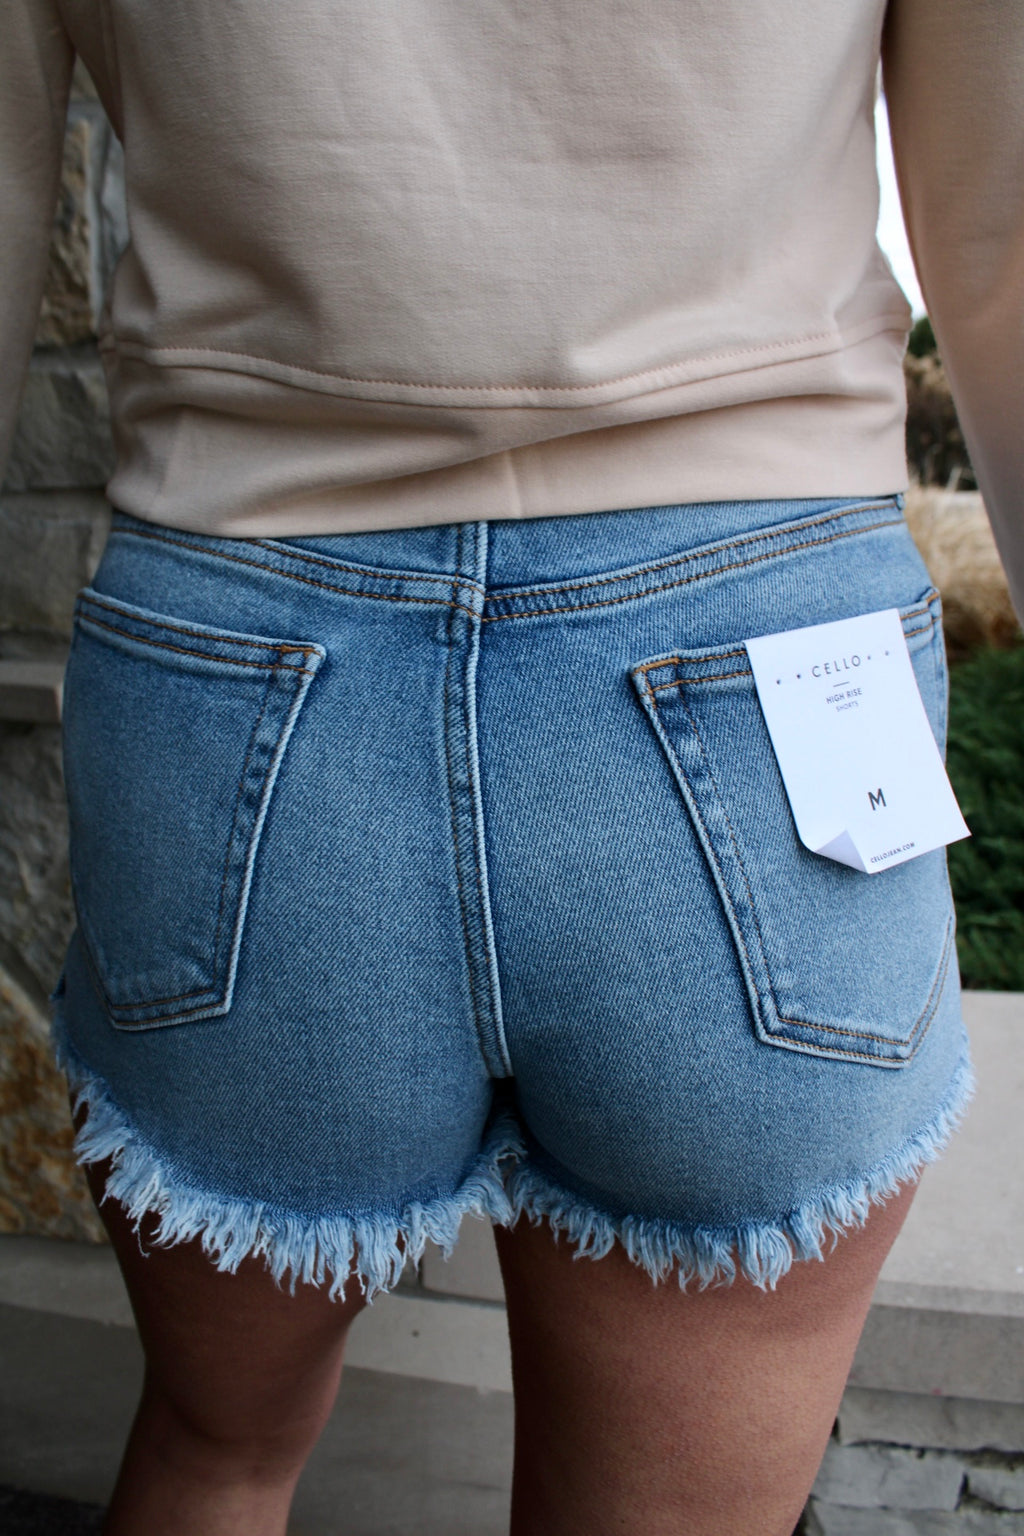 Cello Jeans High Rise Destroyed Fray Shorts